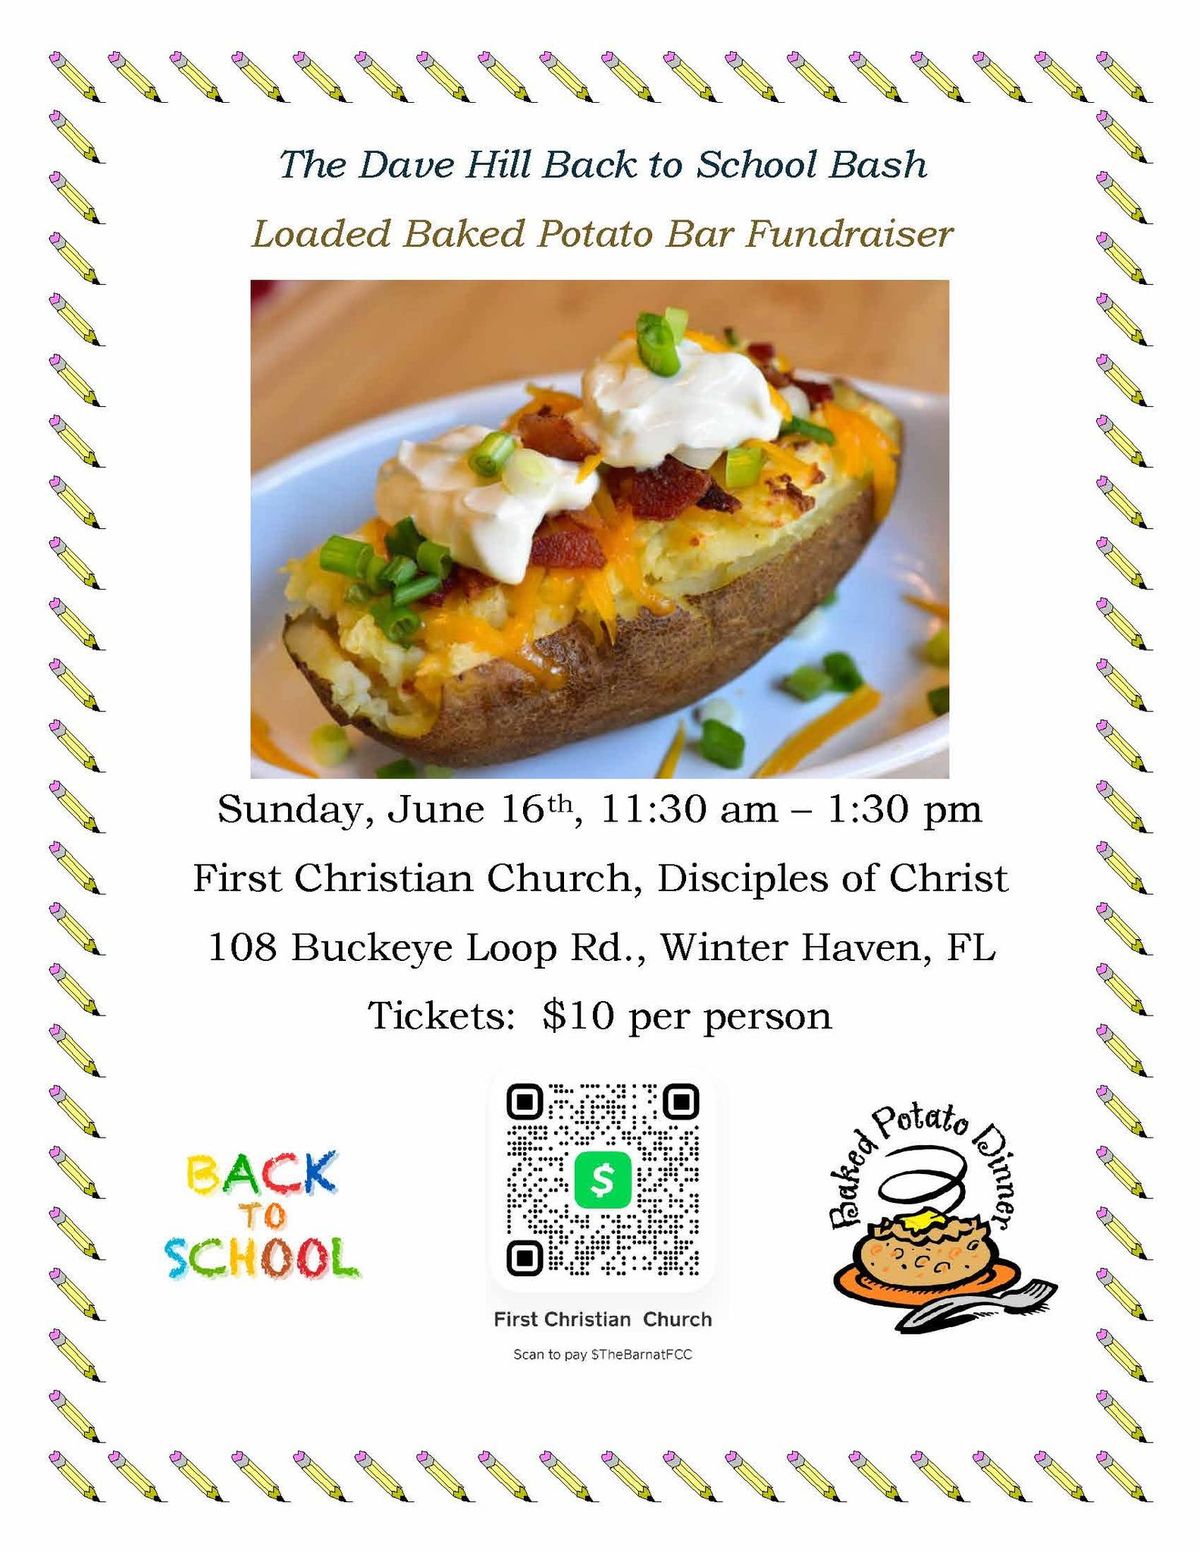 The Dave Hill Back to School Bash Loaded Baked Potato Bar Fundraiser